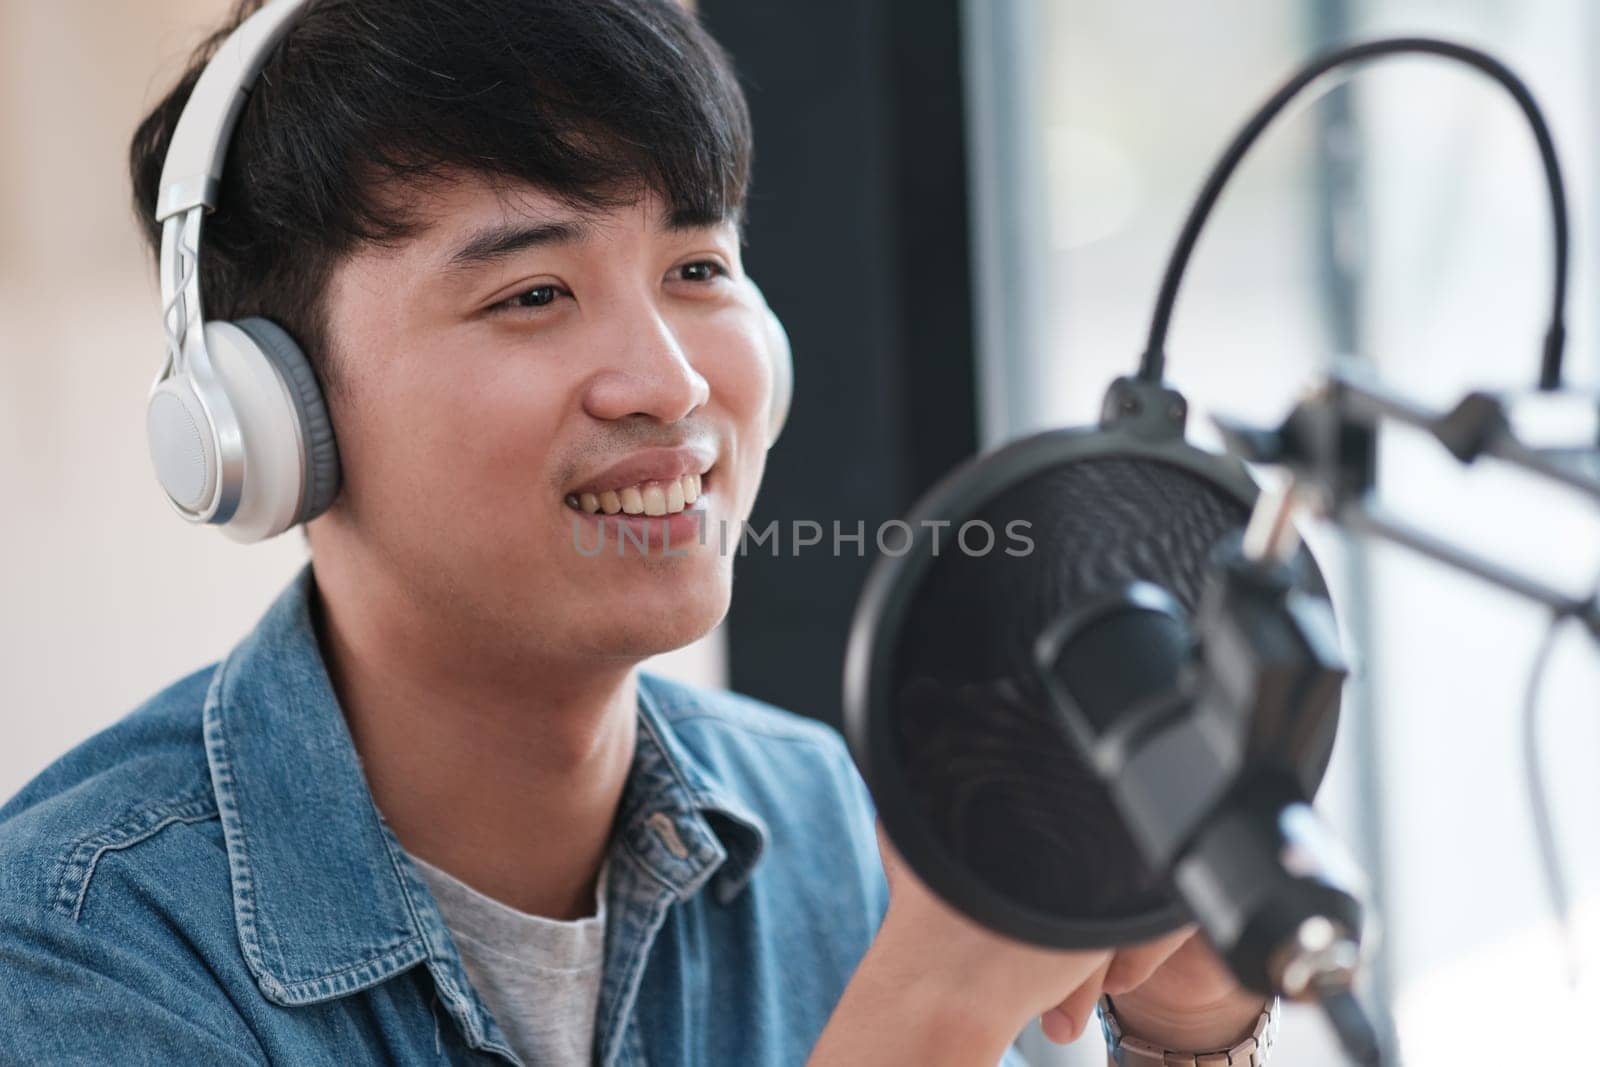 A man wearing headphones is smiling while holding a microphone by ijeab